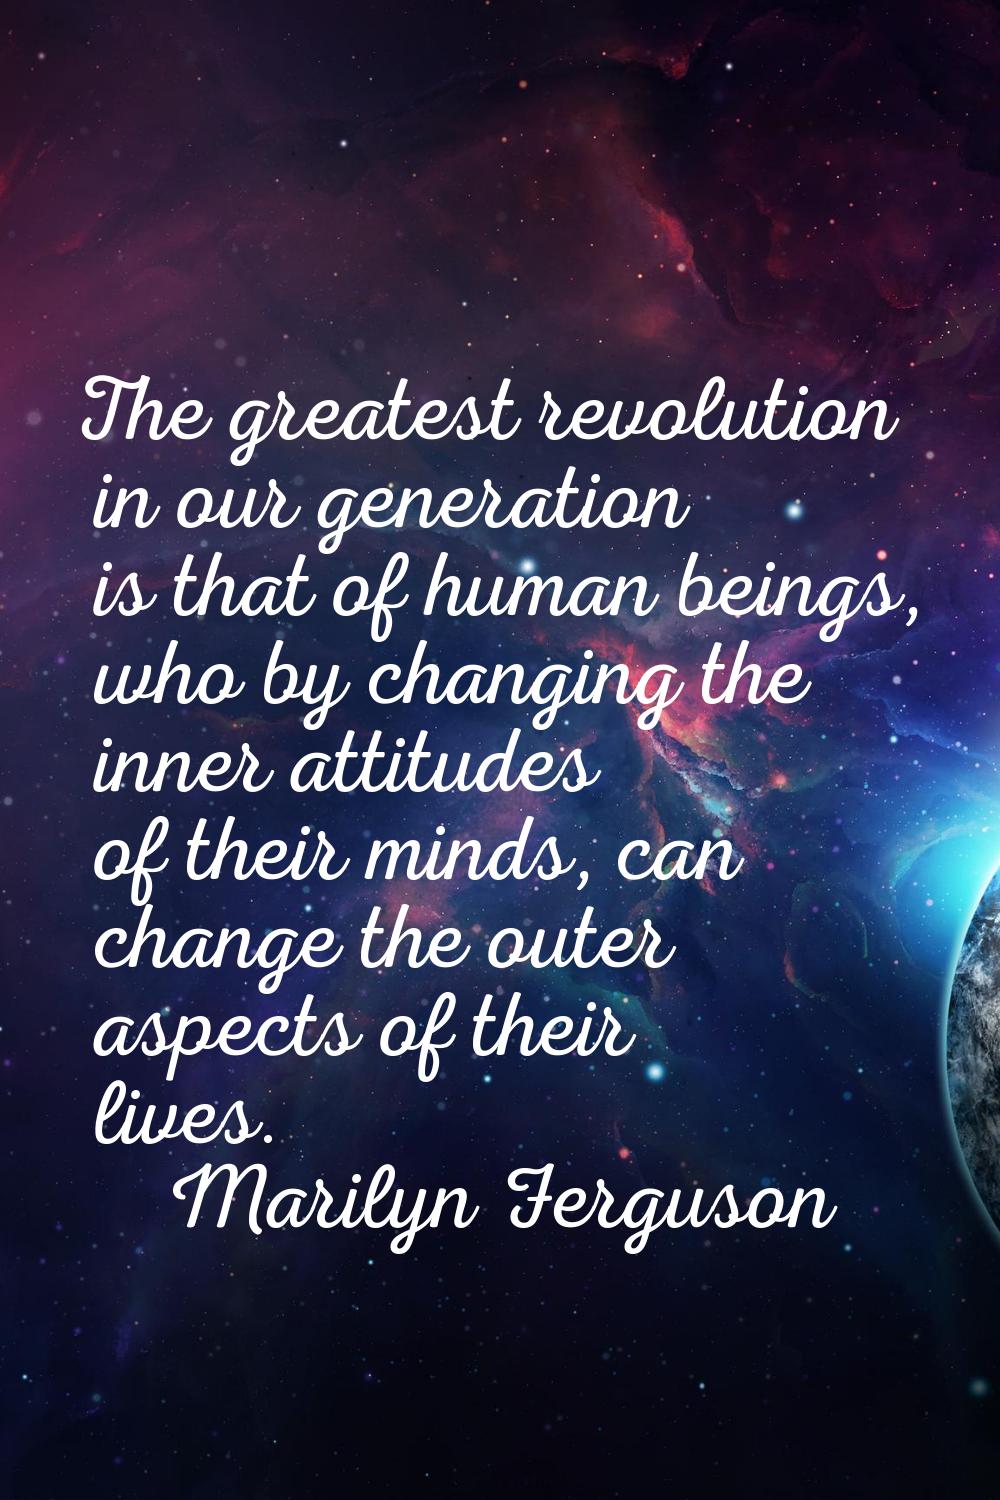 The greatest revolution in our generation is that of human beings, who by changing the inner attitu